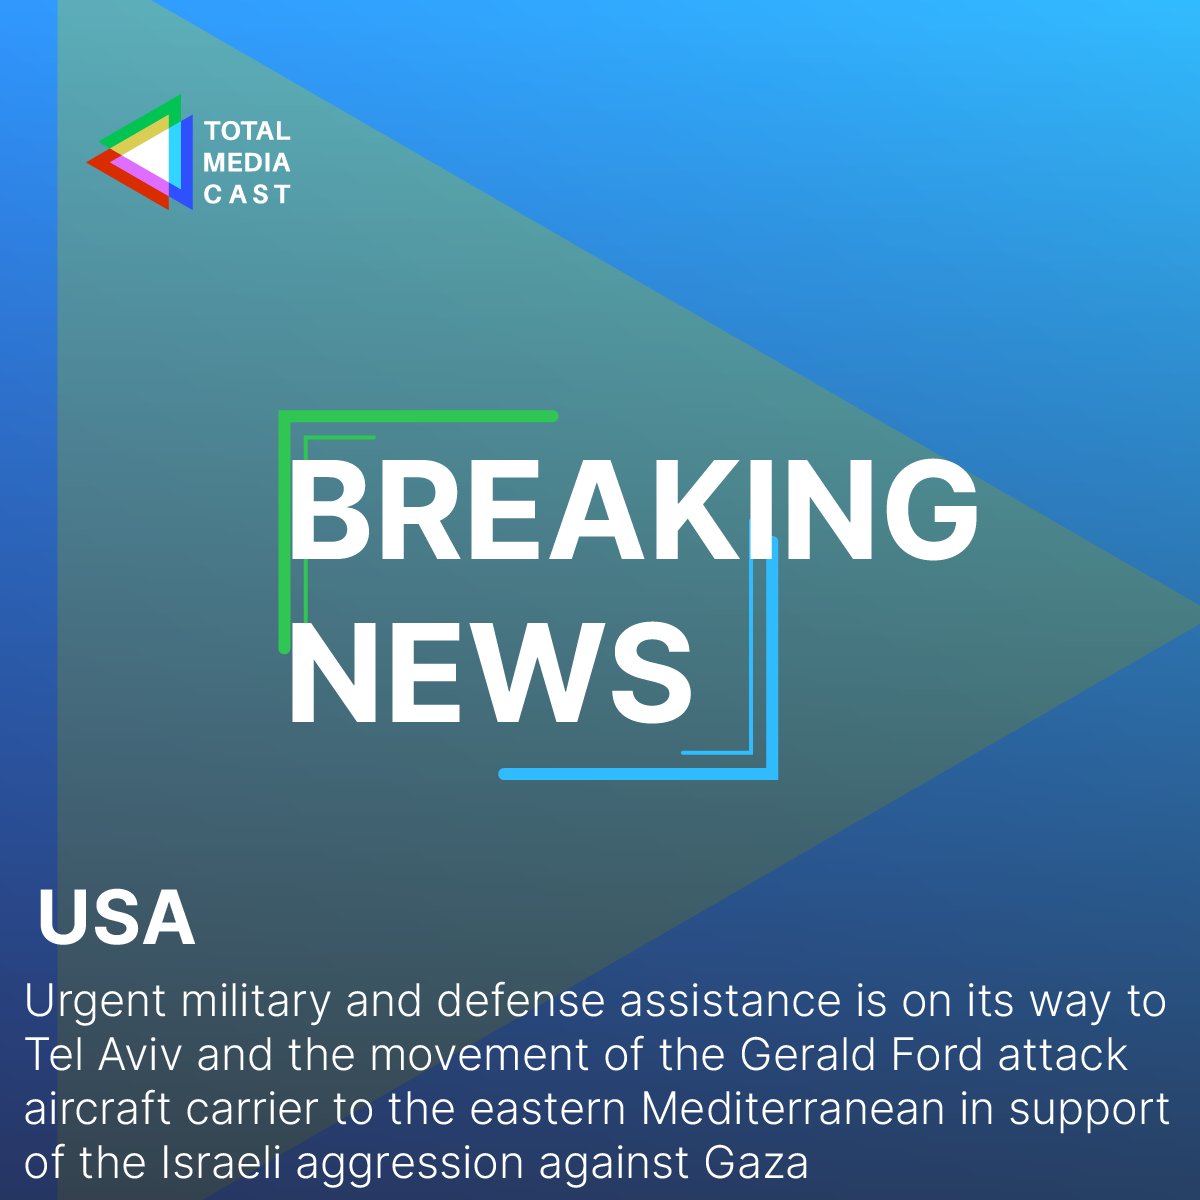 Urgent military and defense assistance is on its way to Tel Aviv and the movement of the Gerald Ford attack aircraft carrier to the eastern Mediterranean in support of Israel
#USA #MilitaryAssistance #OperationAlAqsaFlood #Palestine #War #Resistance #Occupation
#TotalMediaCast